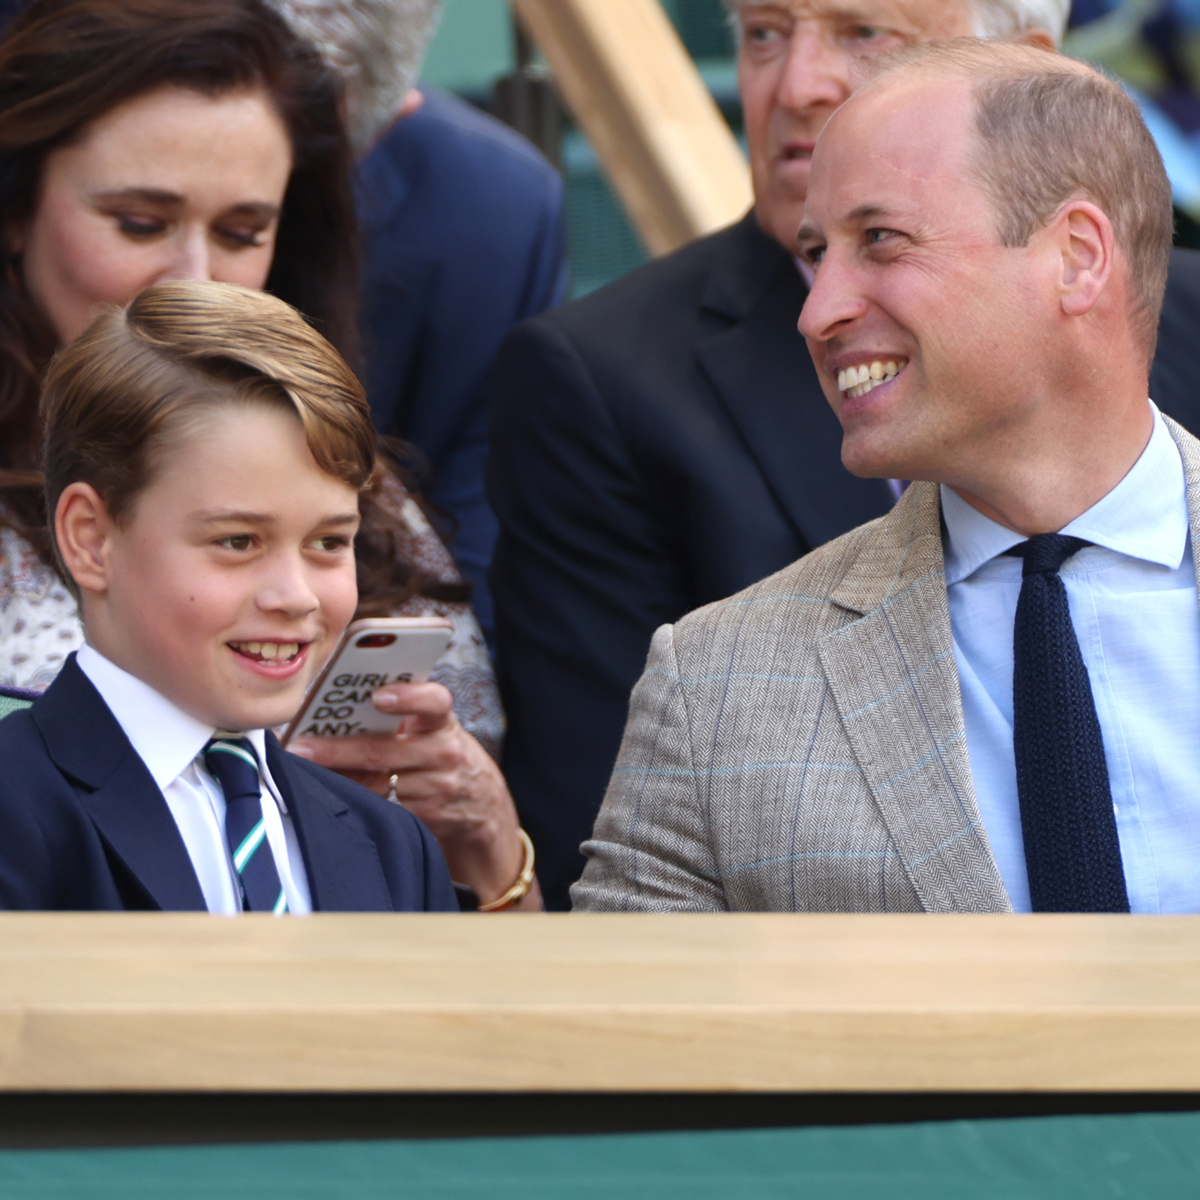 Prince George Makes His Wimbledon Debut With Parents Kate & William